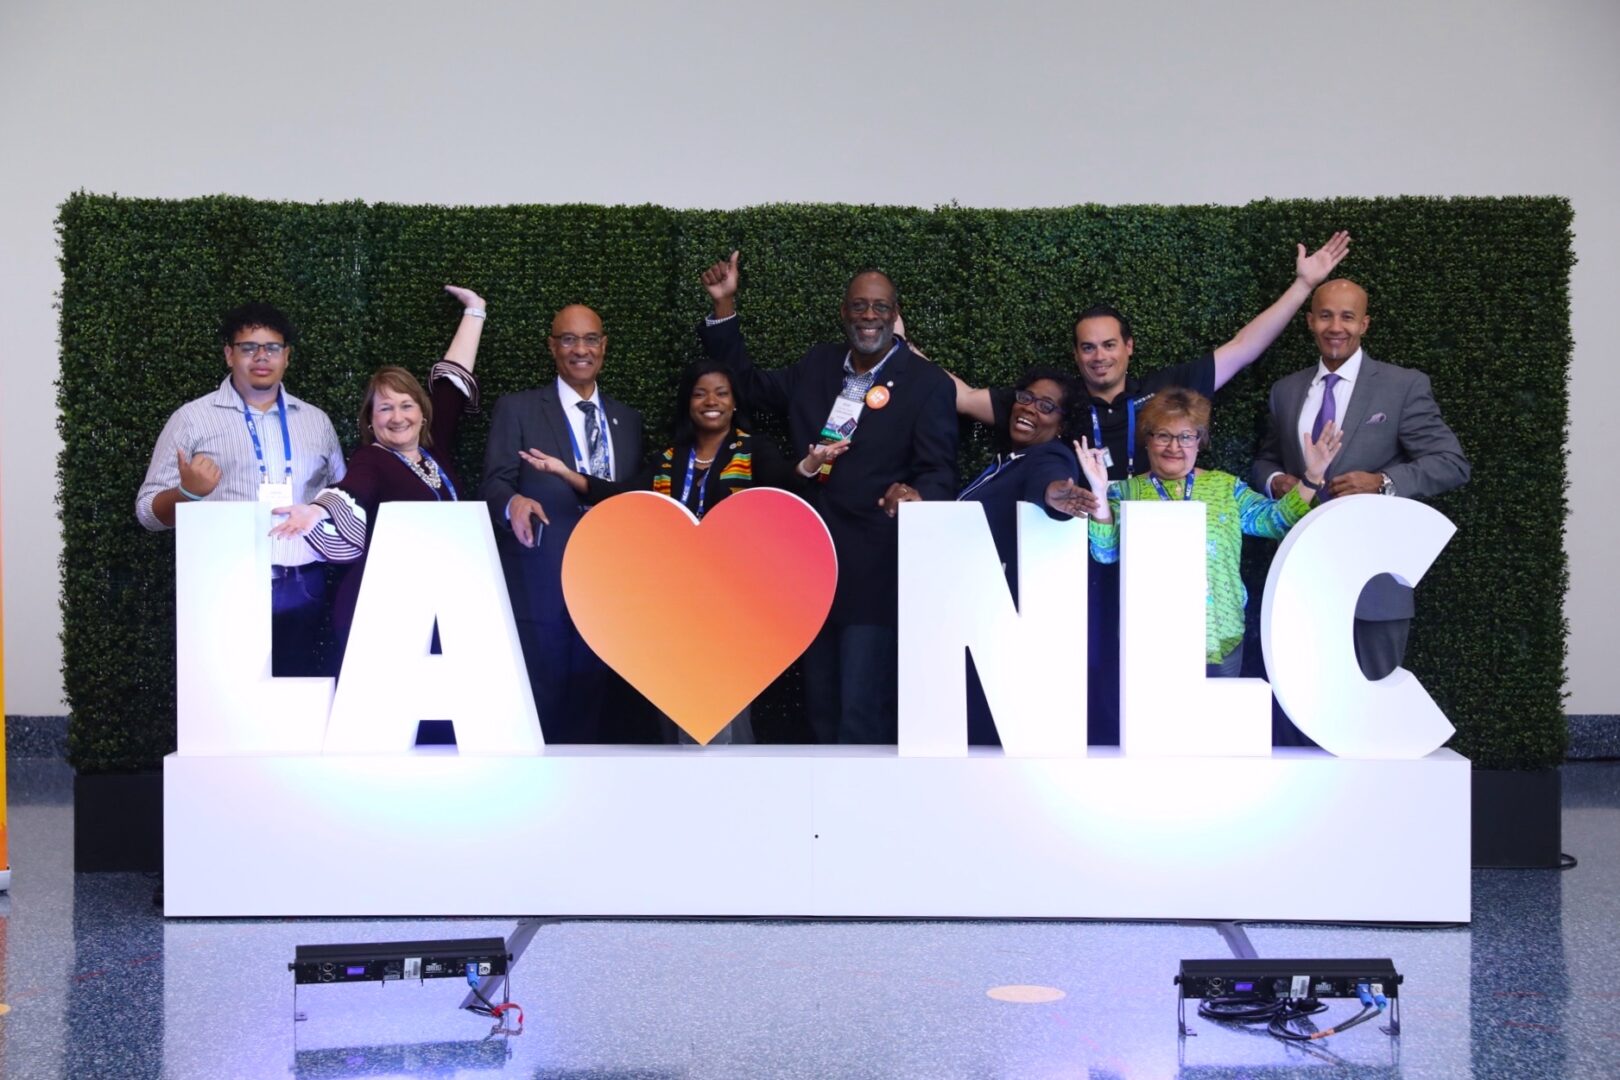 3800 City Leaders Convene In Los Angeles For National League Of Cities